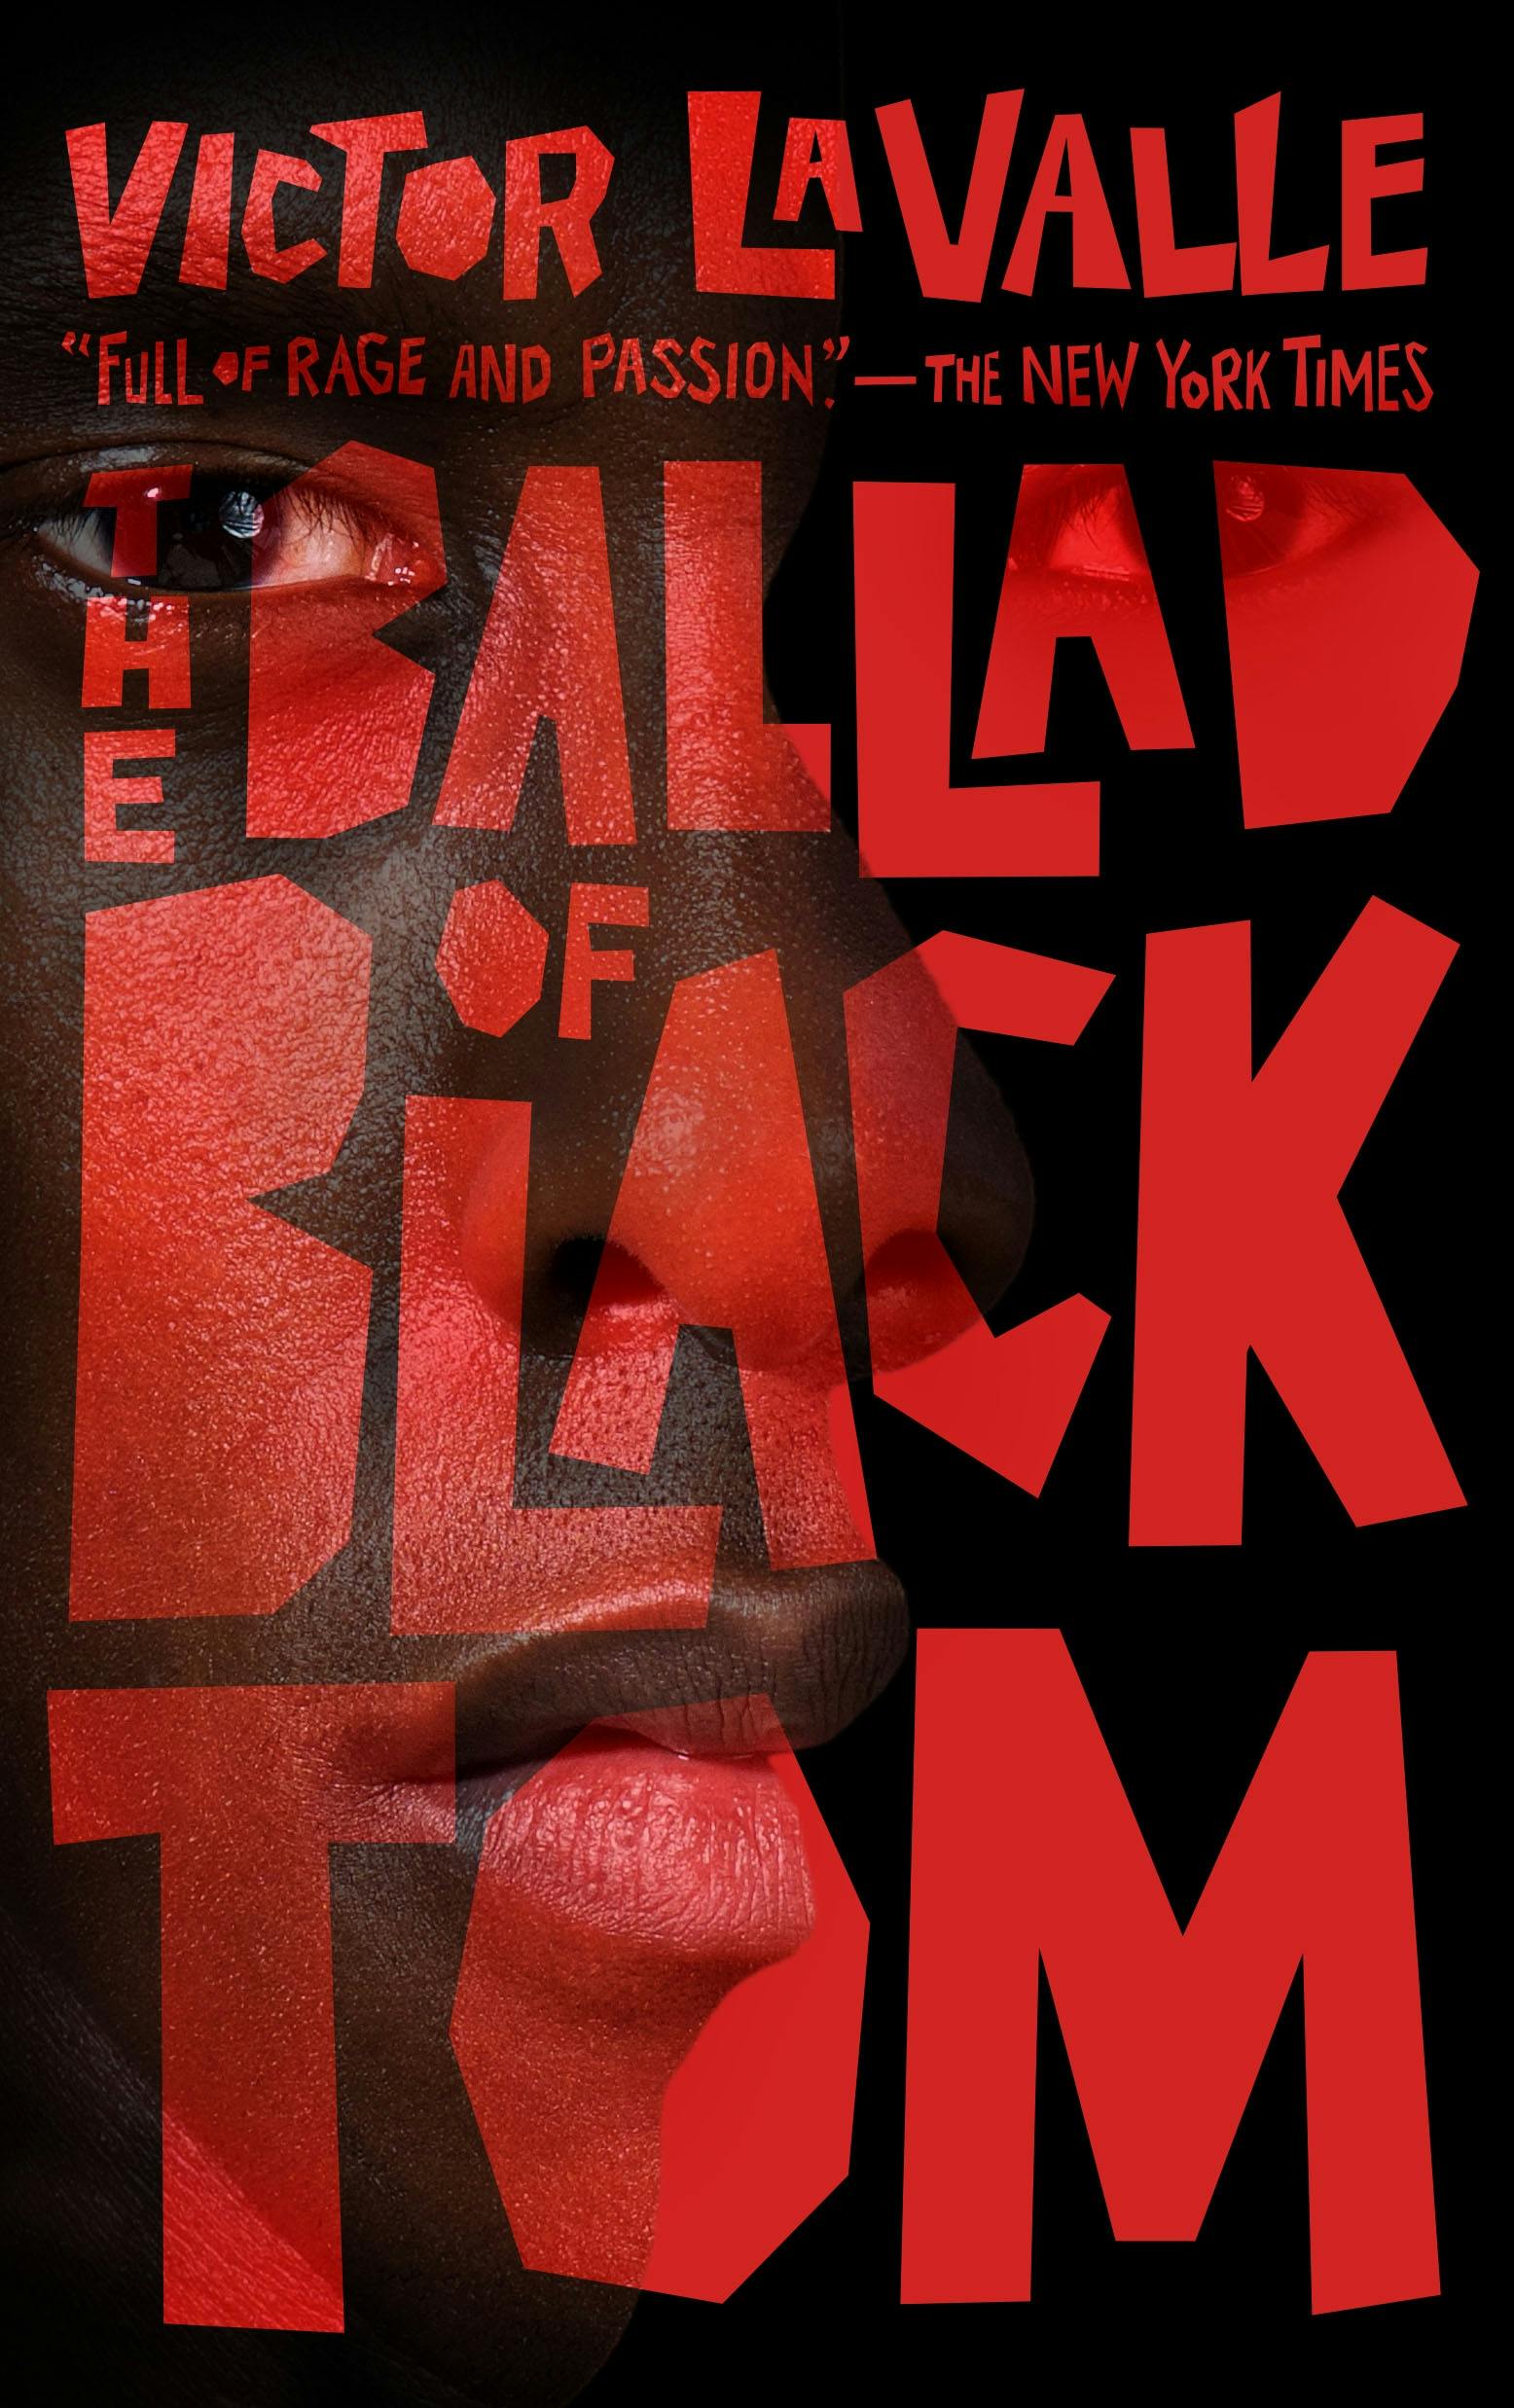 Cover for the book titled as: The Ballad of Black Tom